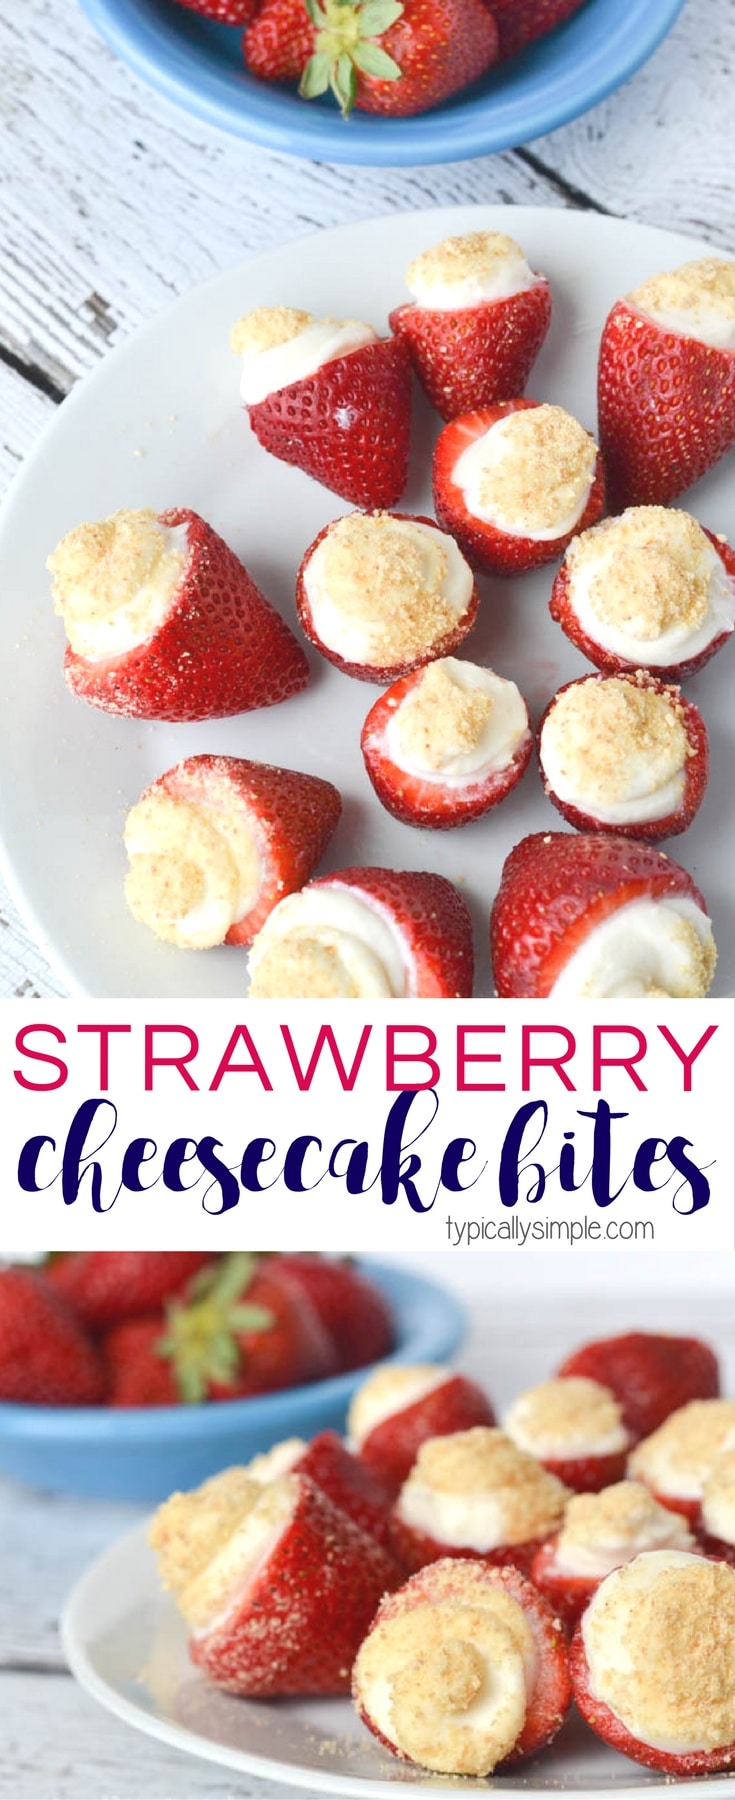 These no bake strawberry cheesecake bites are super easy to make! A delicious sweet treat that makes a great dessert for parties, brunch, or as an afternoon snack!